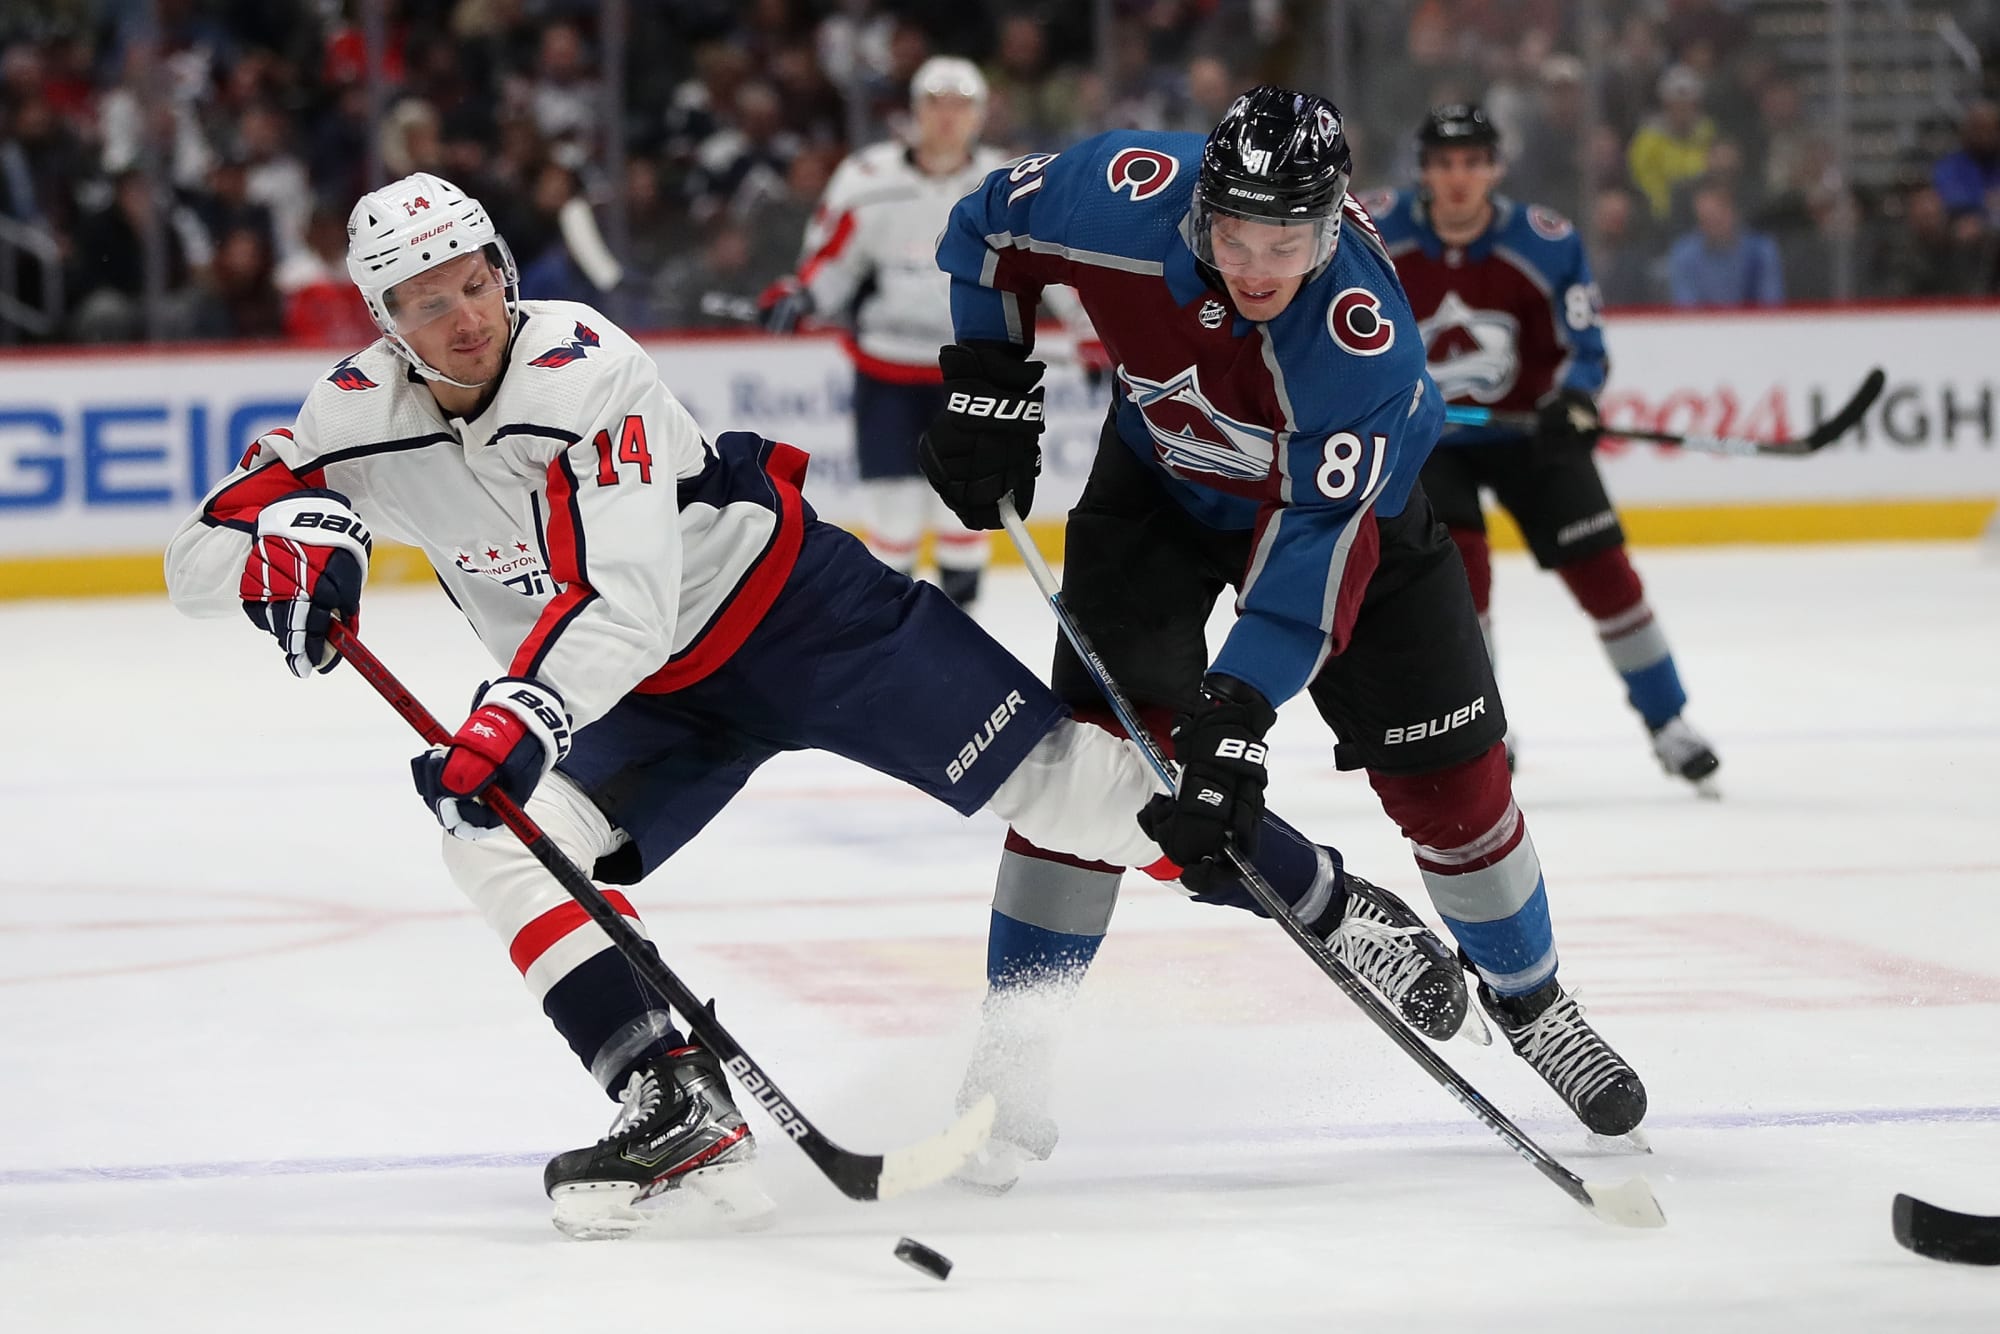 Colorado Avalanche defeated by Washington Capitals 3-2 in tight game